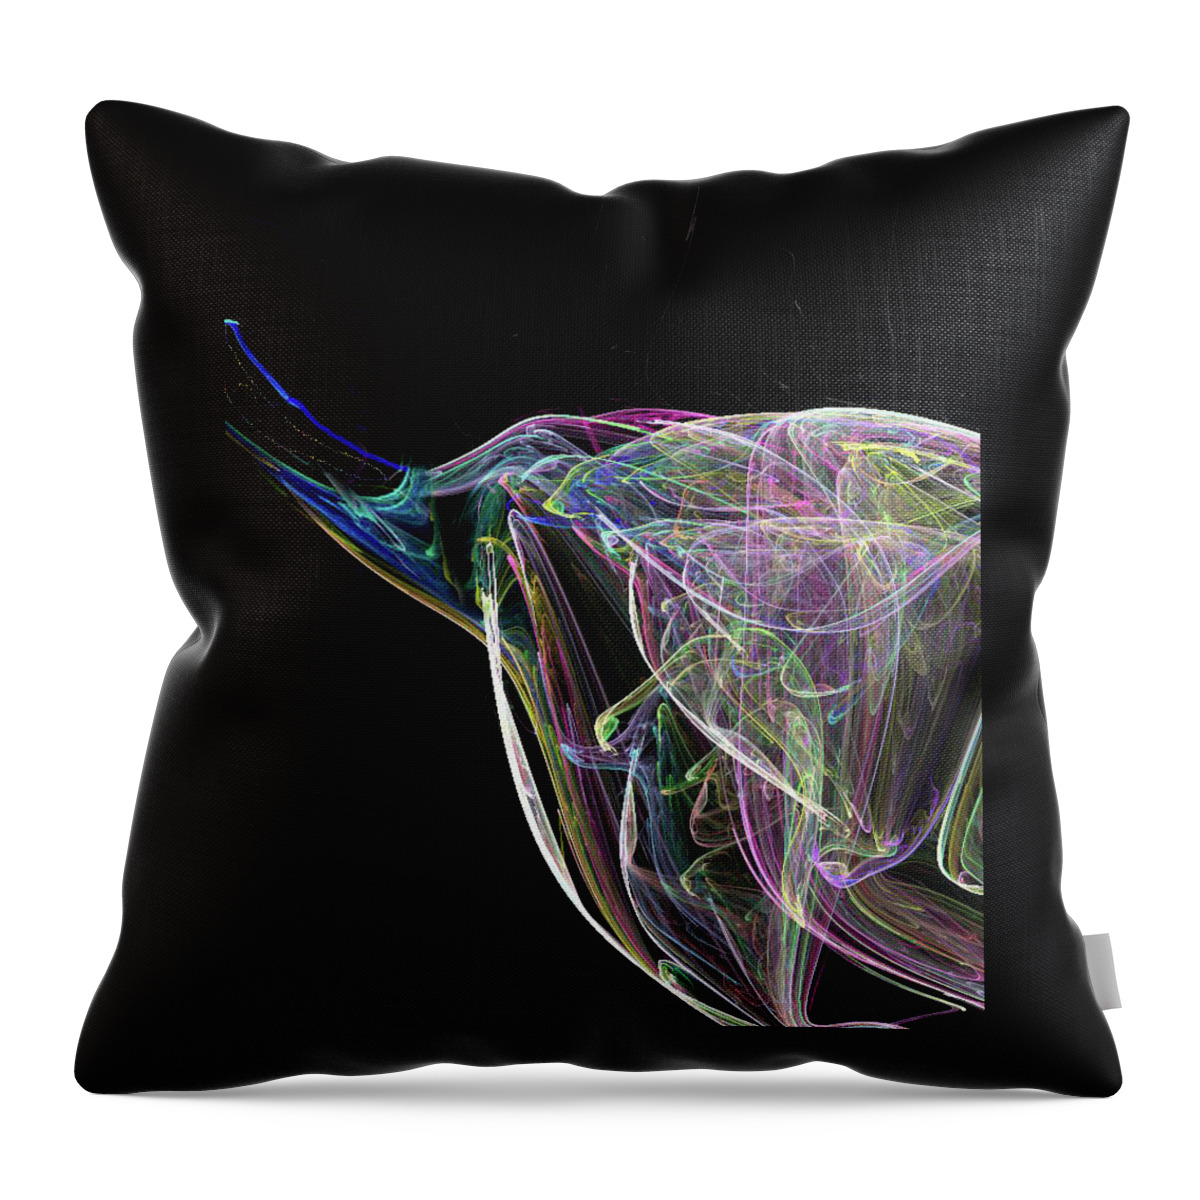 Space Throw Pillow featuring the digital art Elle-phant In Black by Kelly Dallas